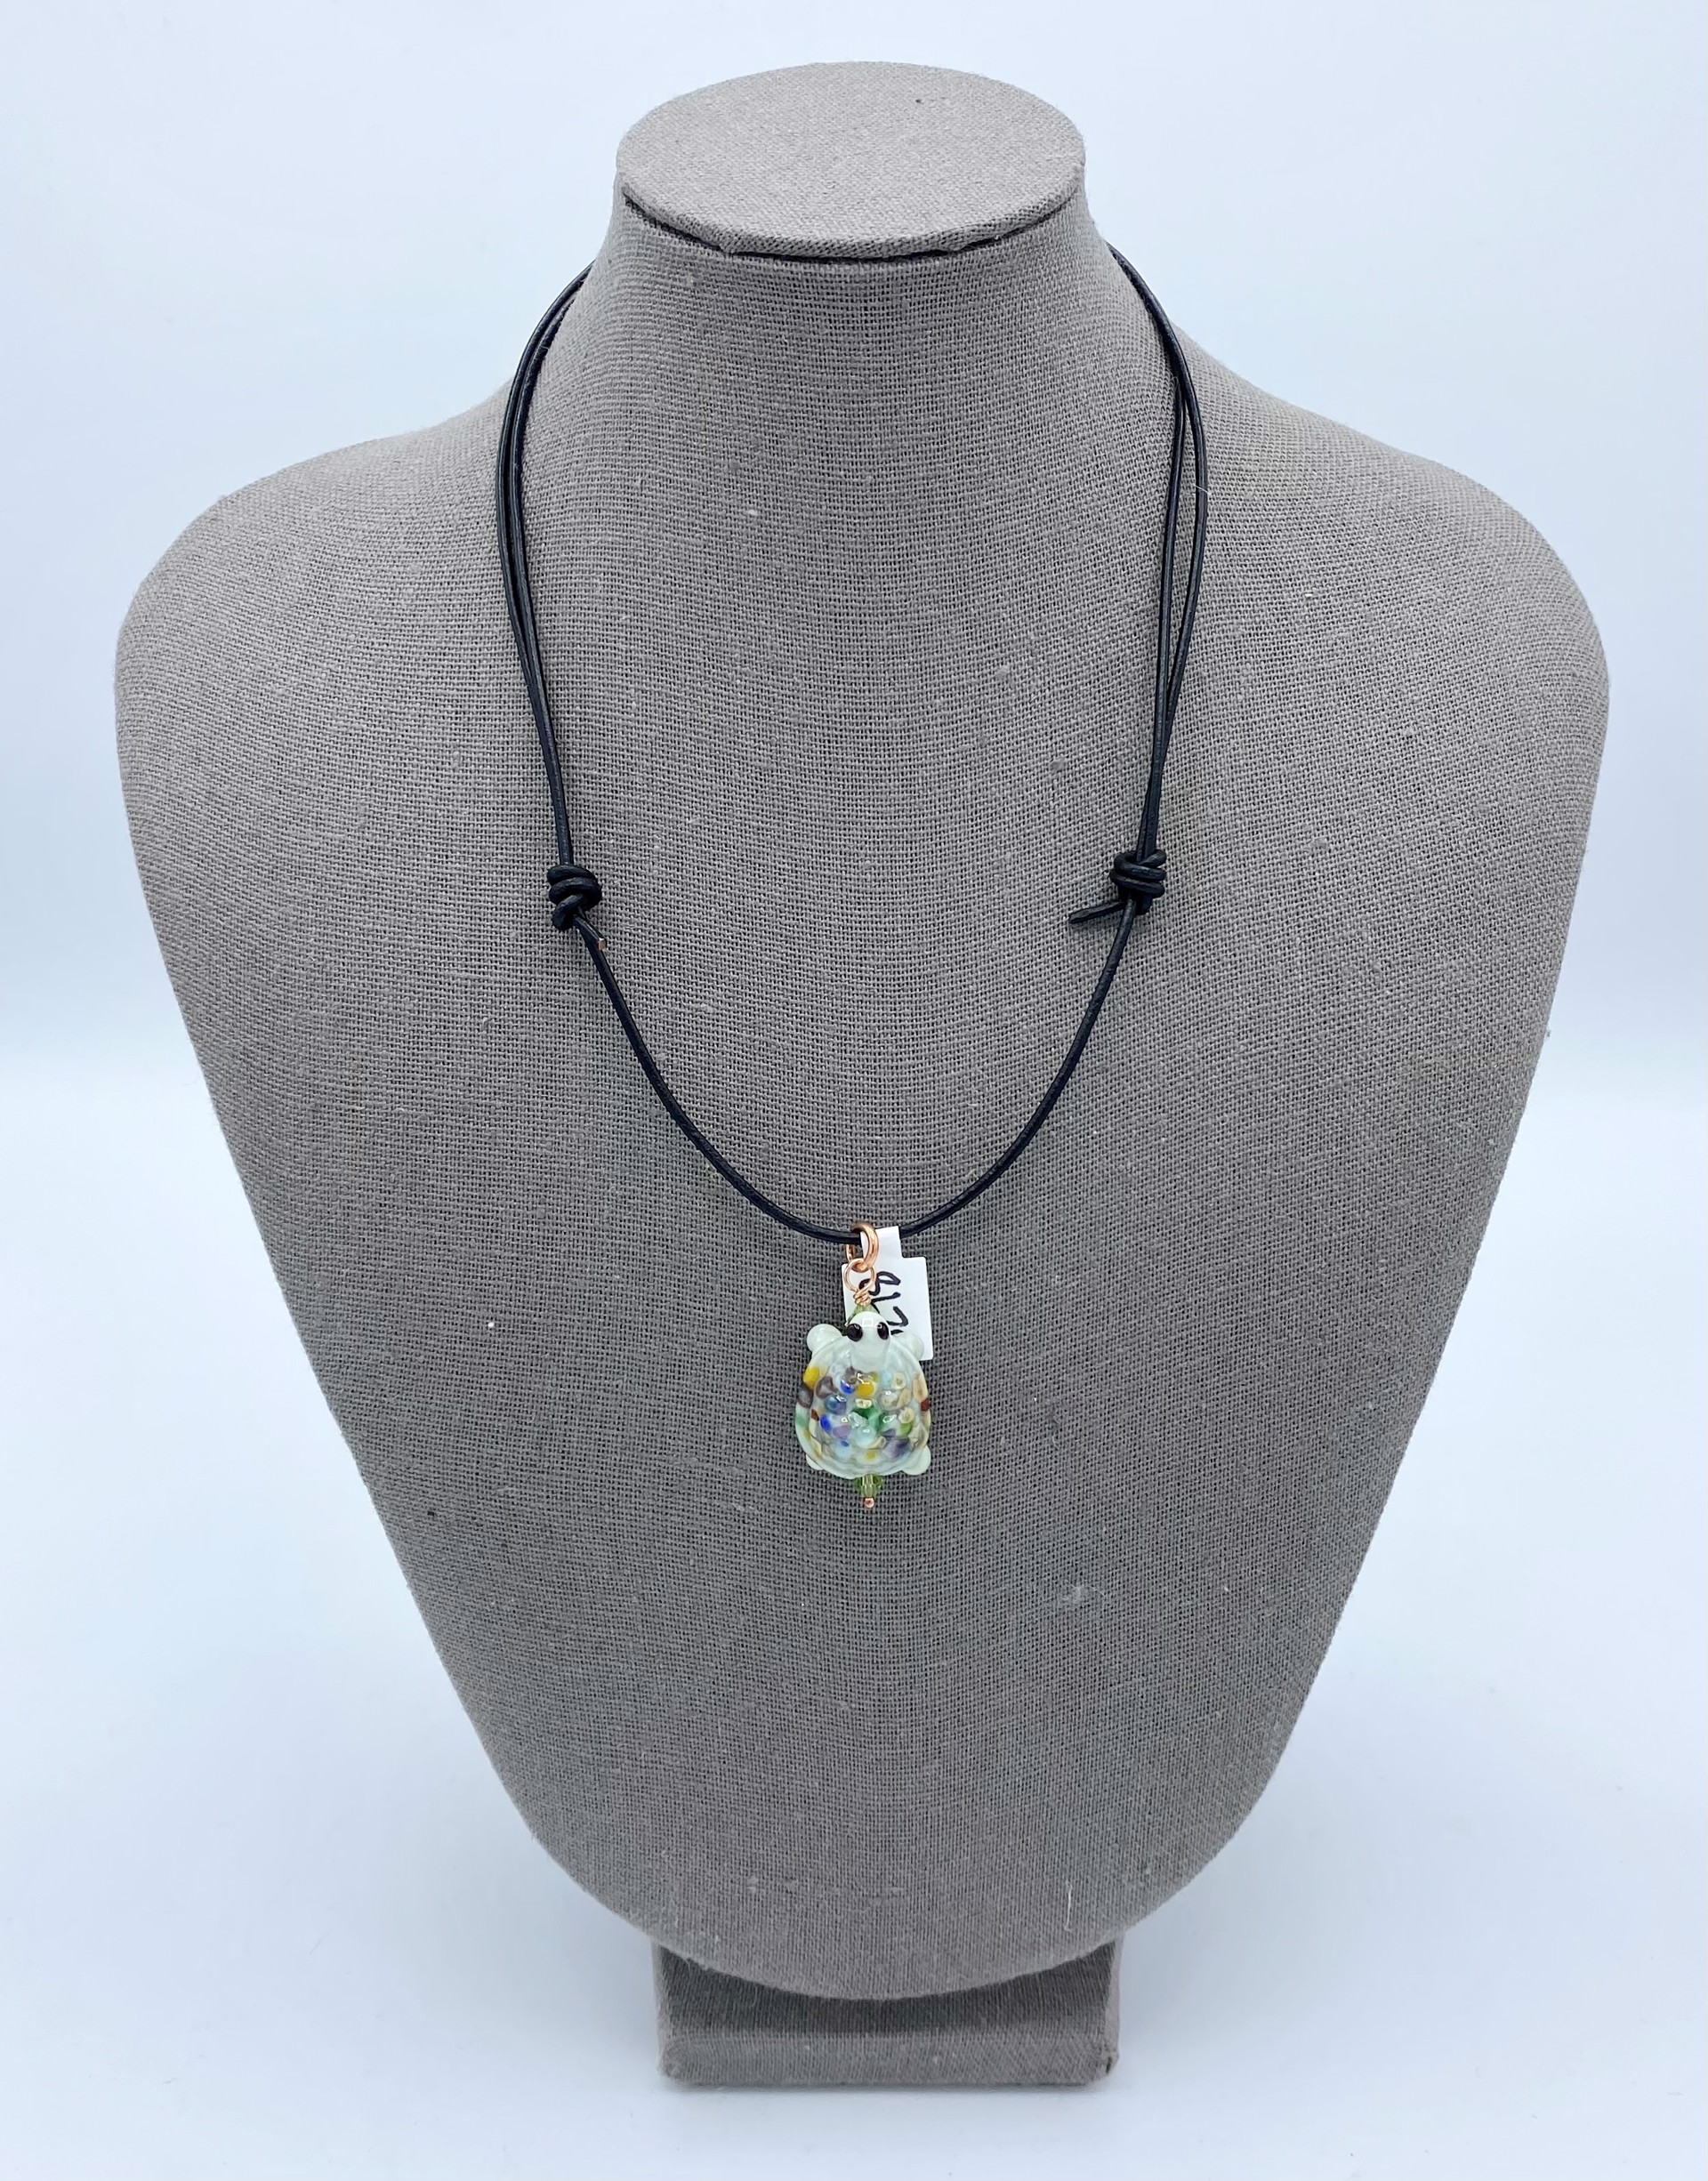 Turtle with Crystals Necklace by Emelie Hebert